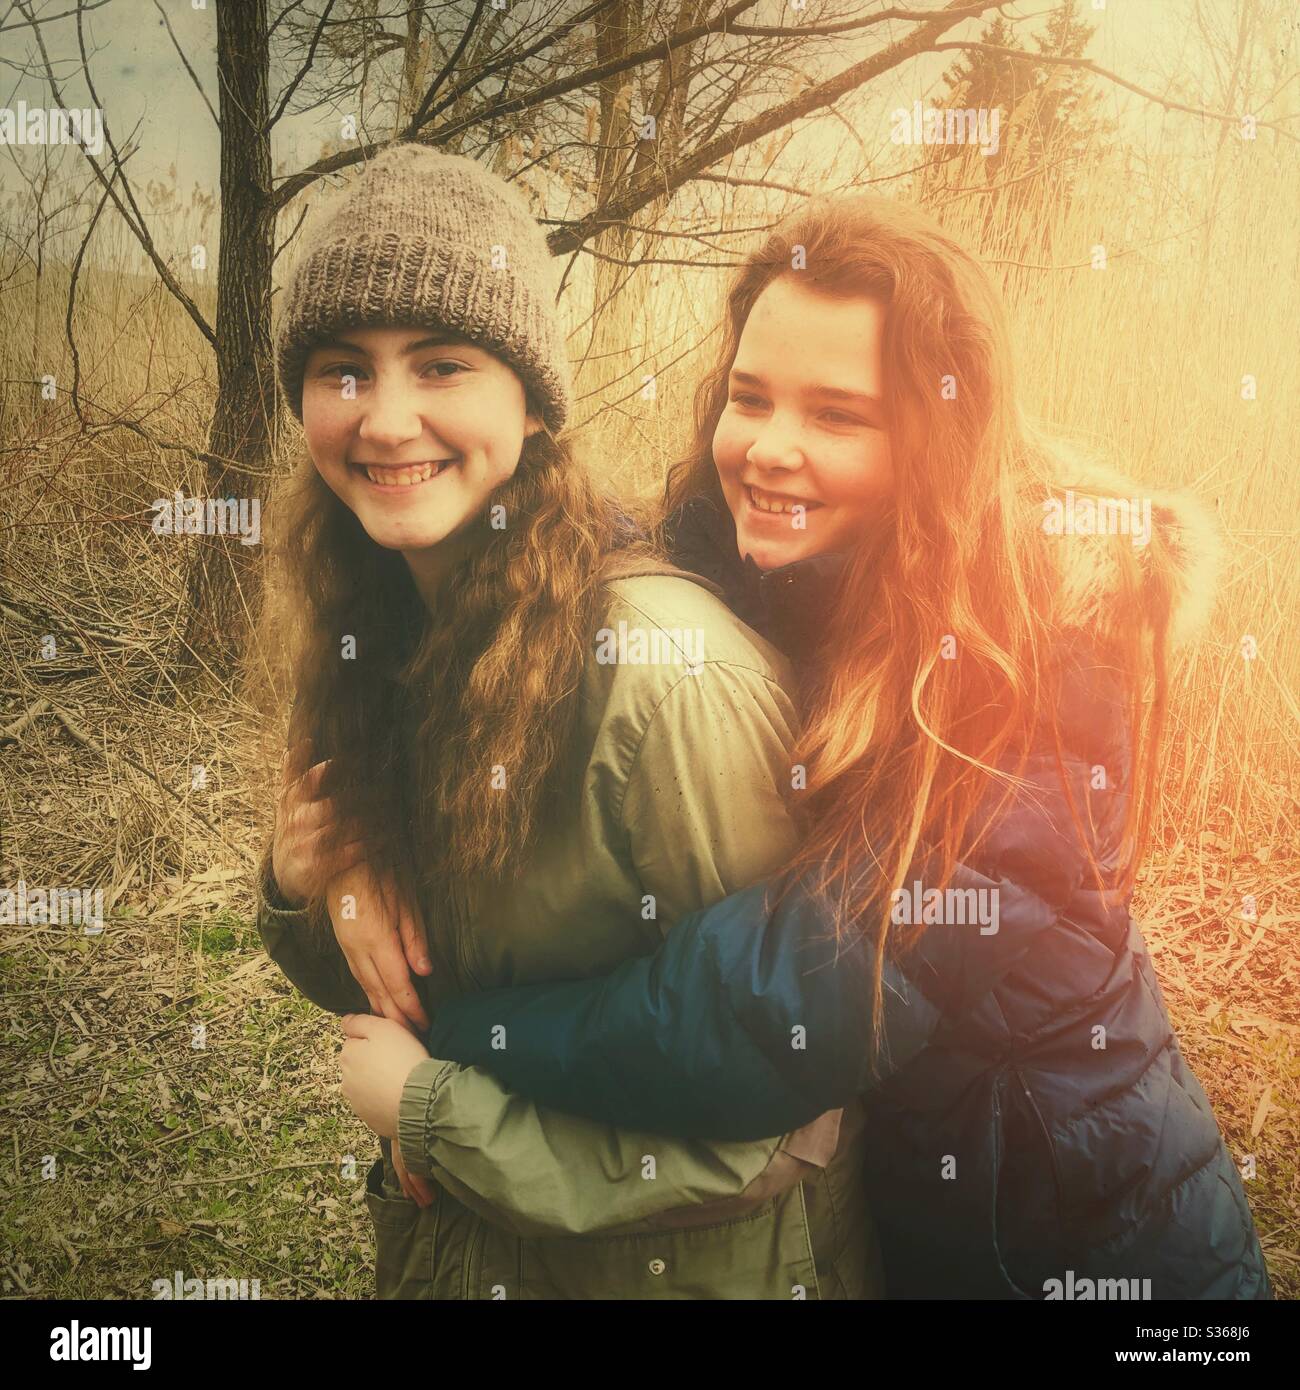 Two teenage girls embracing and smiling outdoors Stock Photo